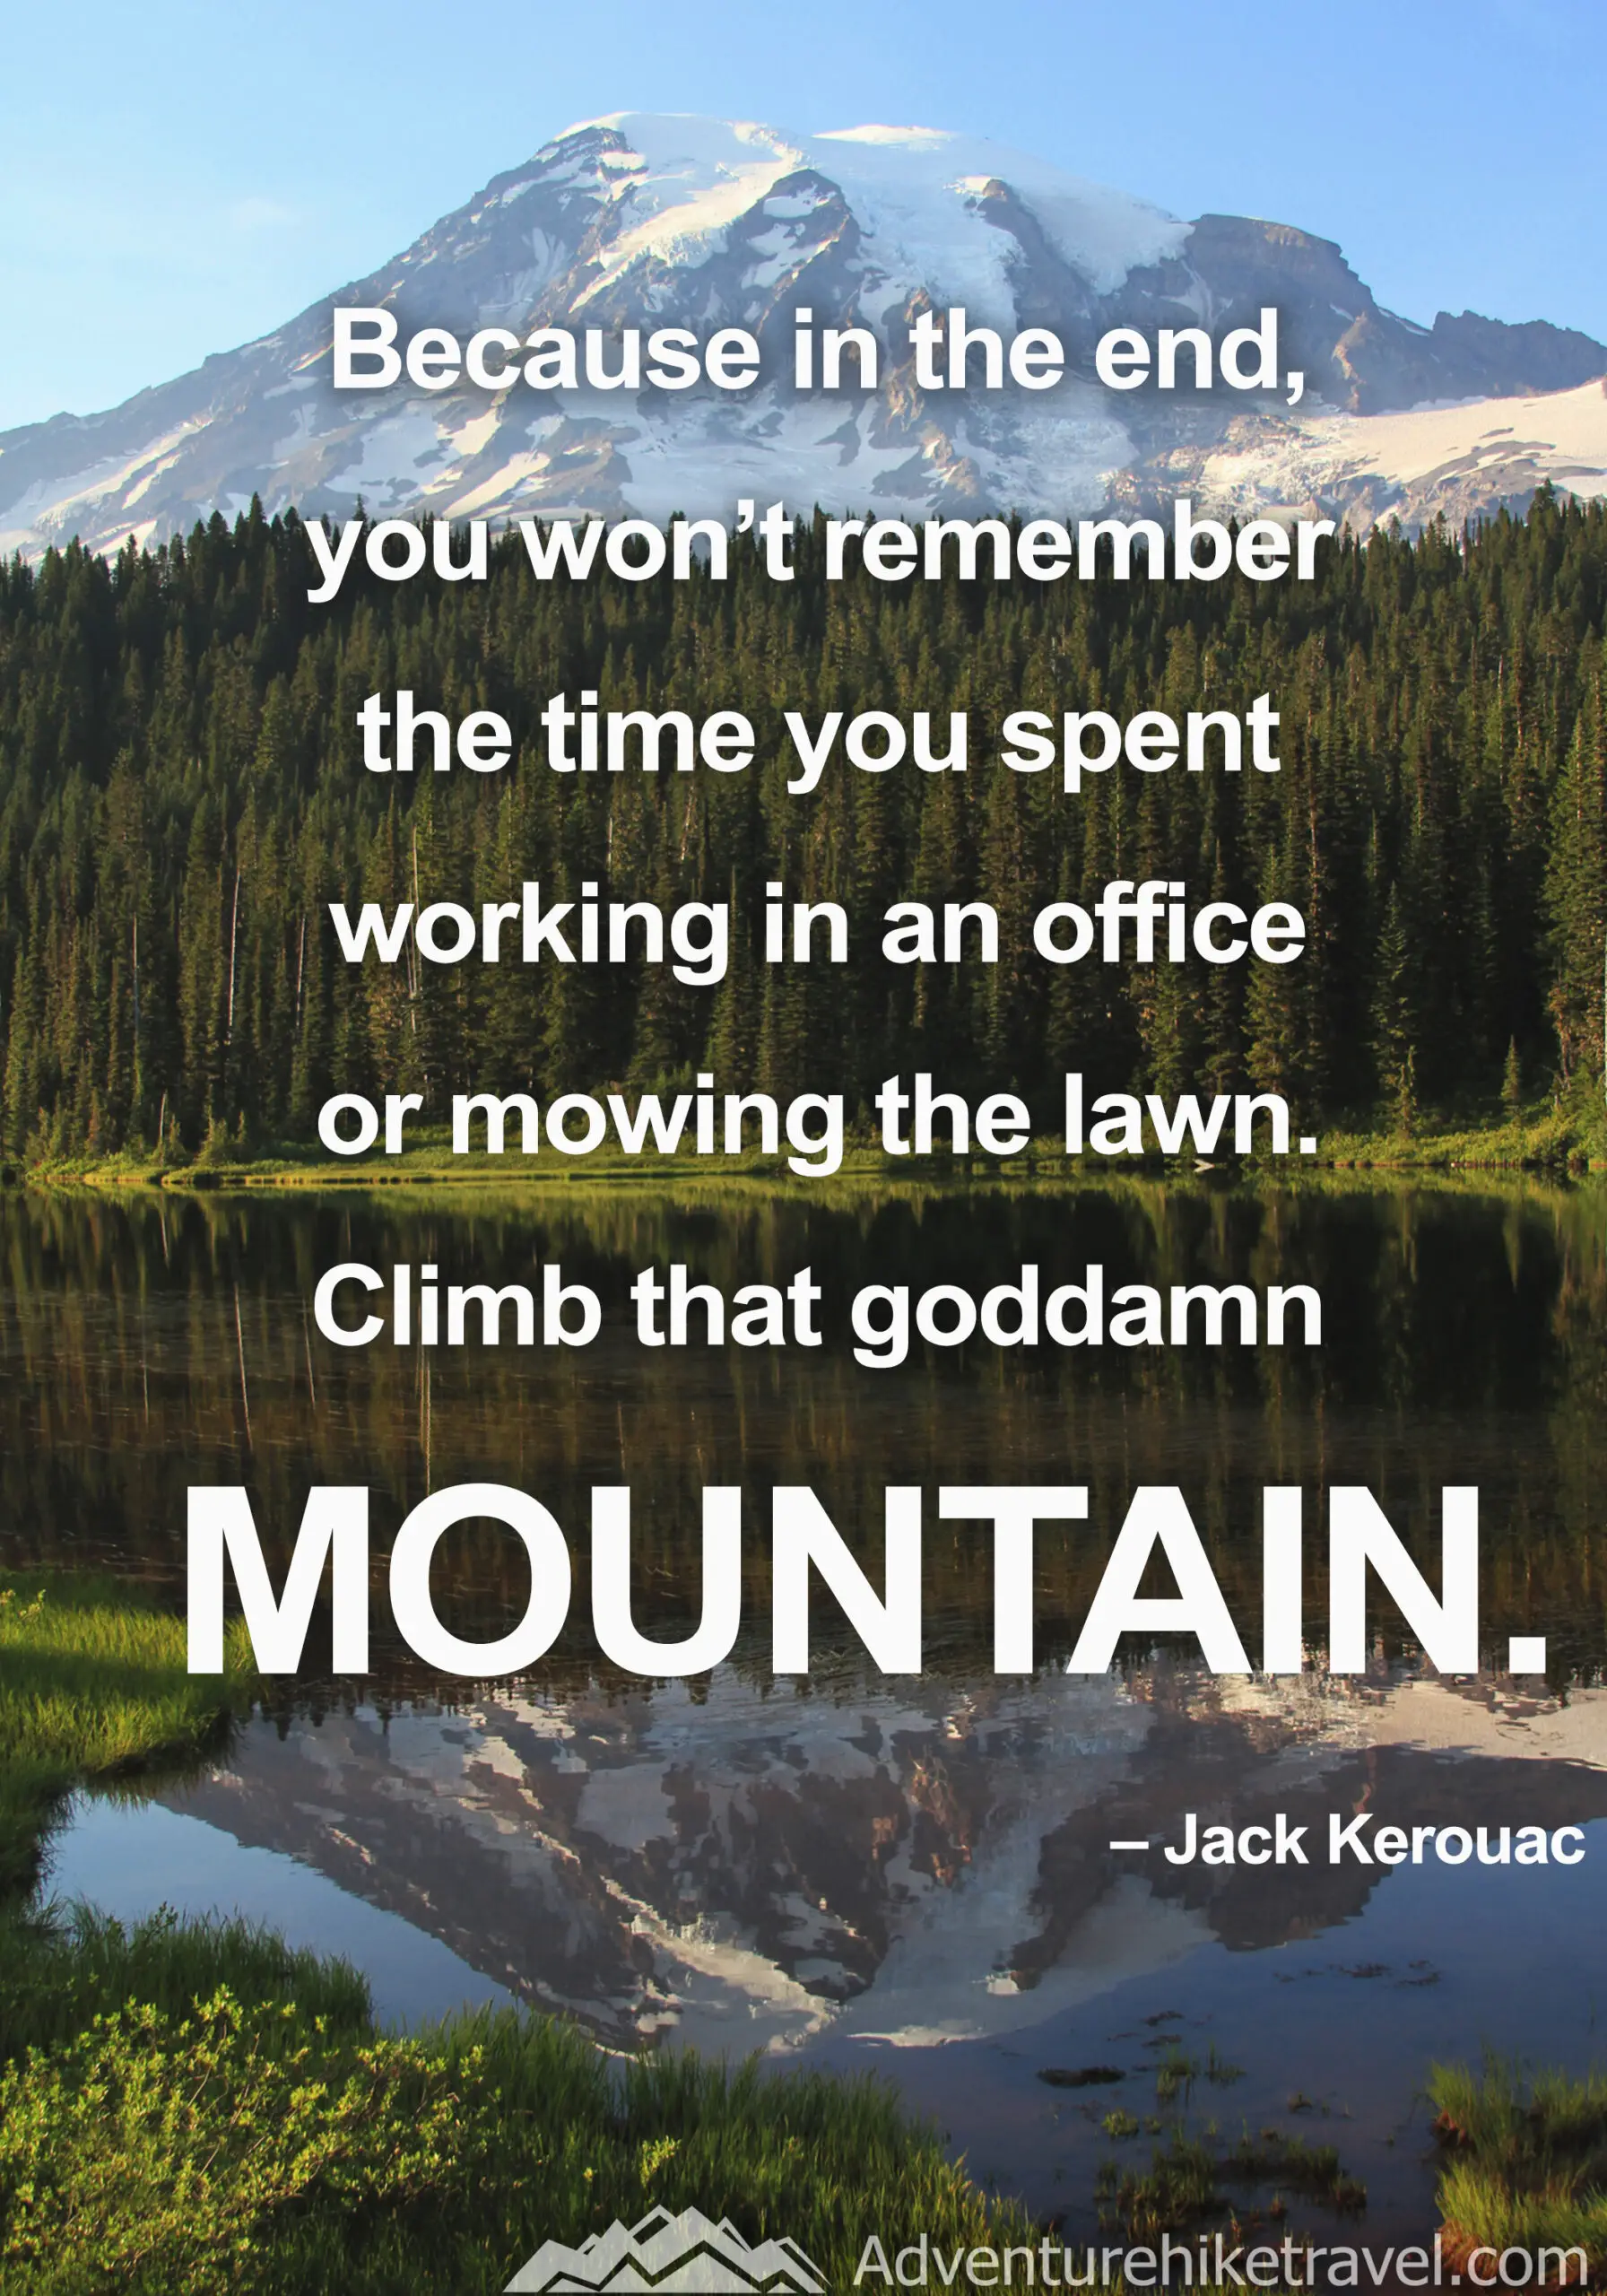 "Because in the end, you won't remember the time you spent working in an office or mowing the lawn. Climb that goddamn mountain. - Jack Kerouac #hiking #quotes #inspirationalquotes #hikingquotes #adventurequotes #outdoors #trekking